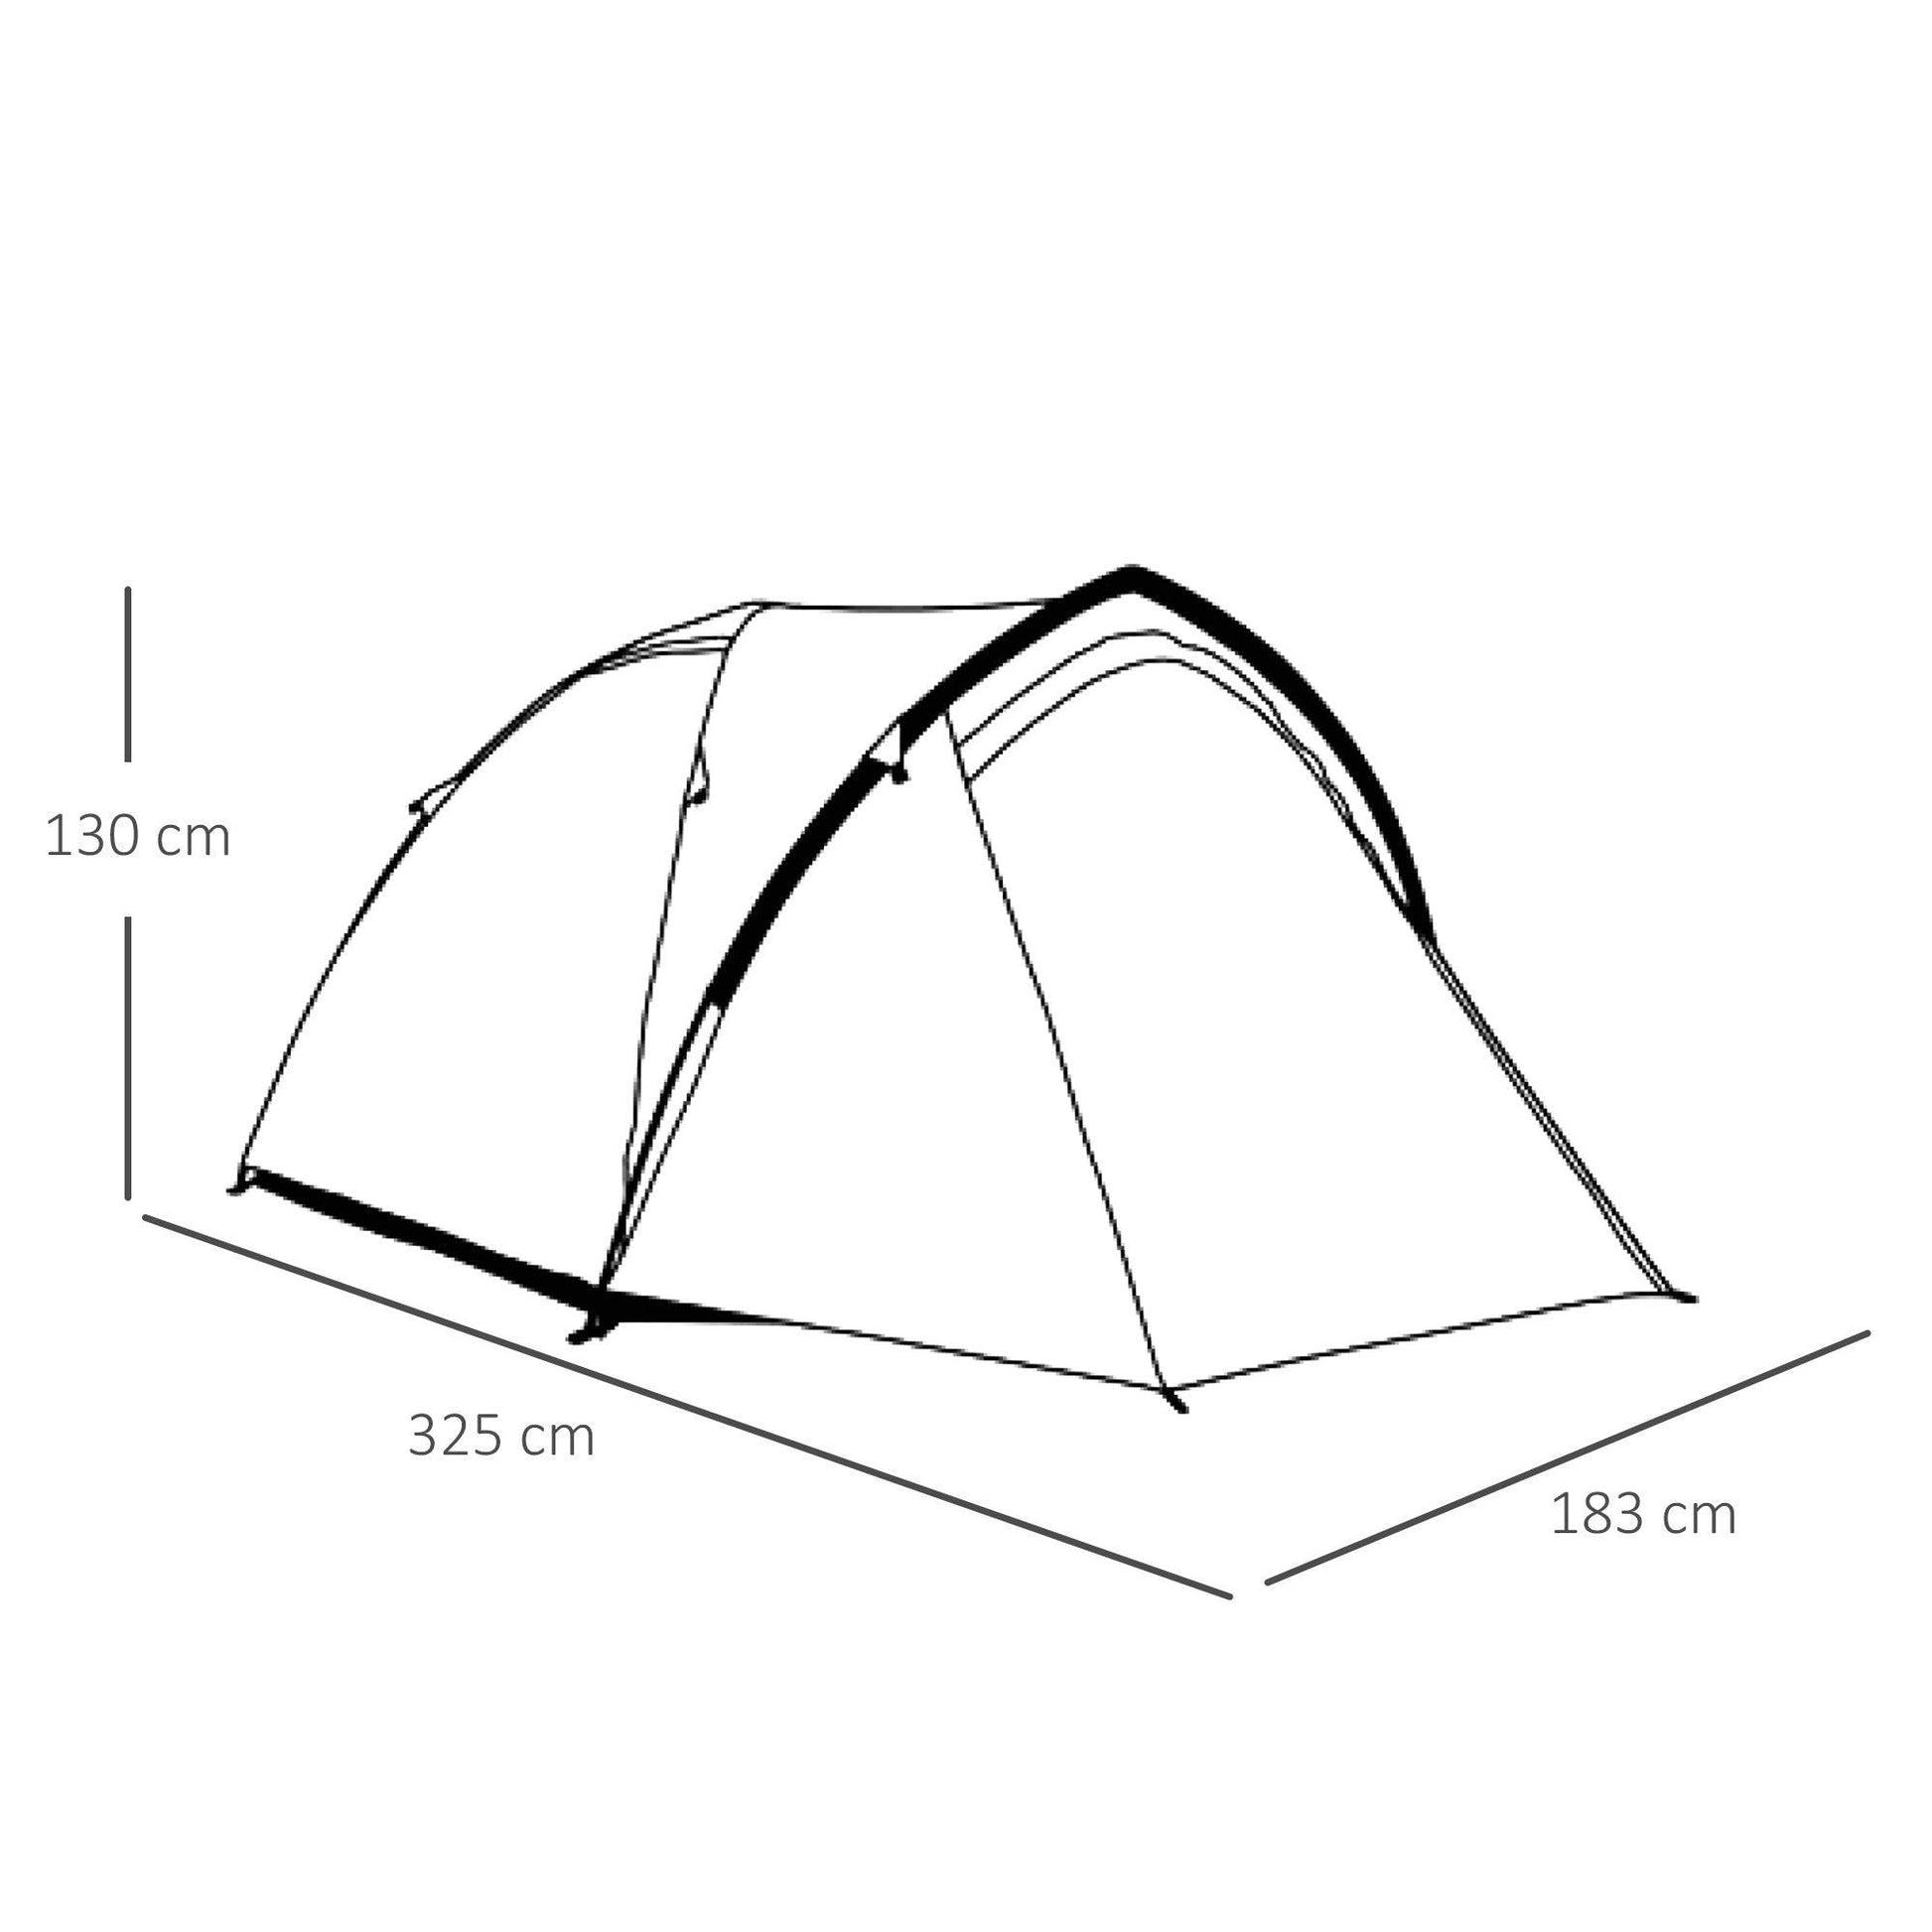 Outsunny 2-Room Camping Dome Tent: Weatherproof & Lightweight - ALL4U RETAILER LTD